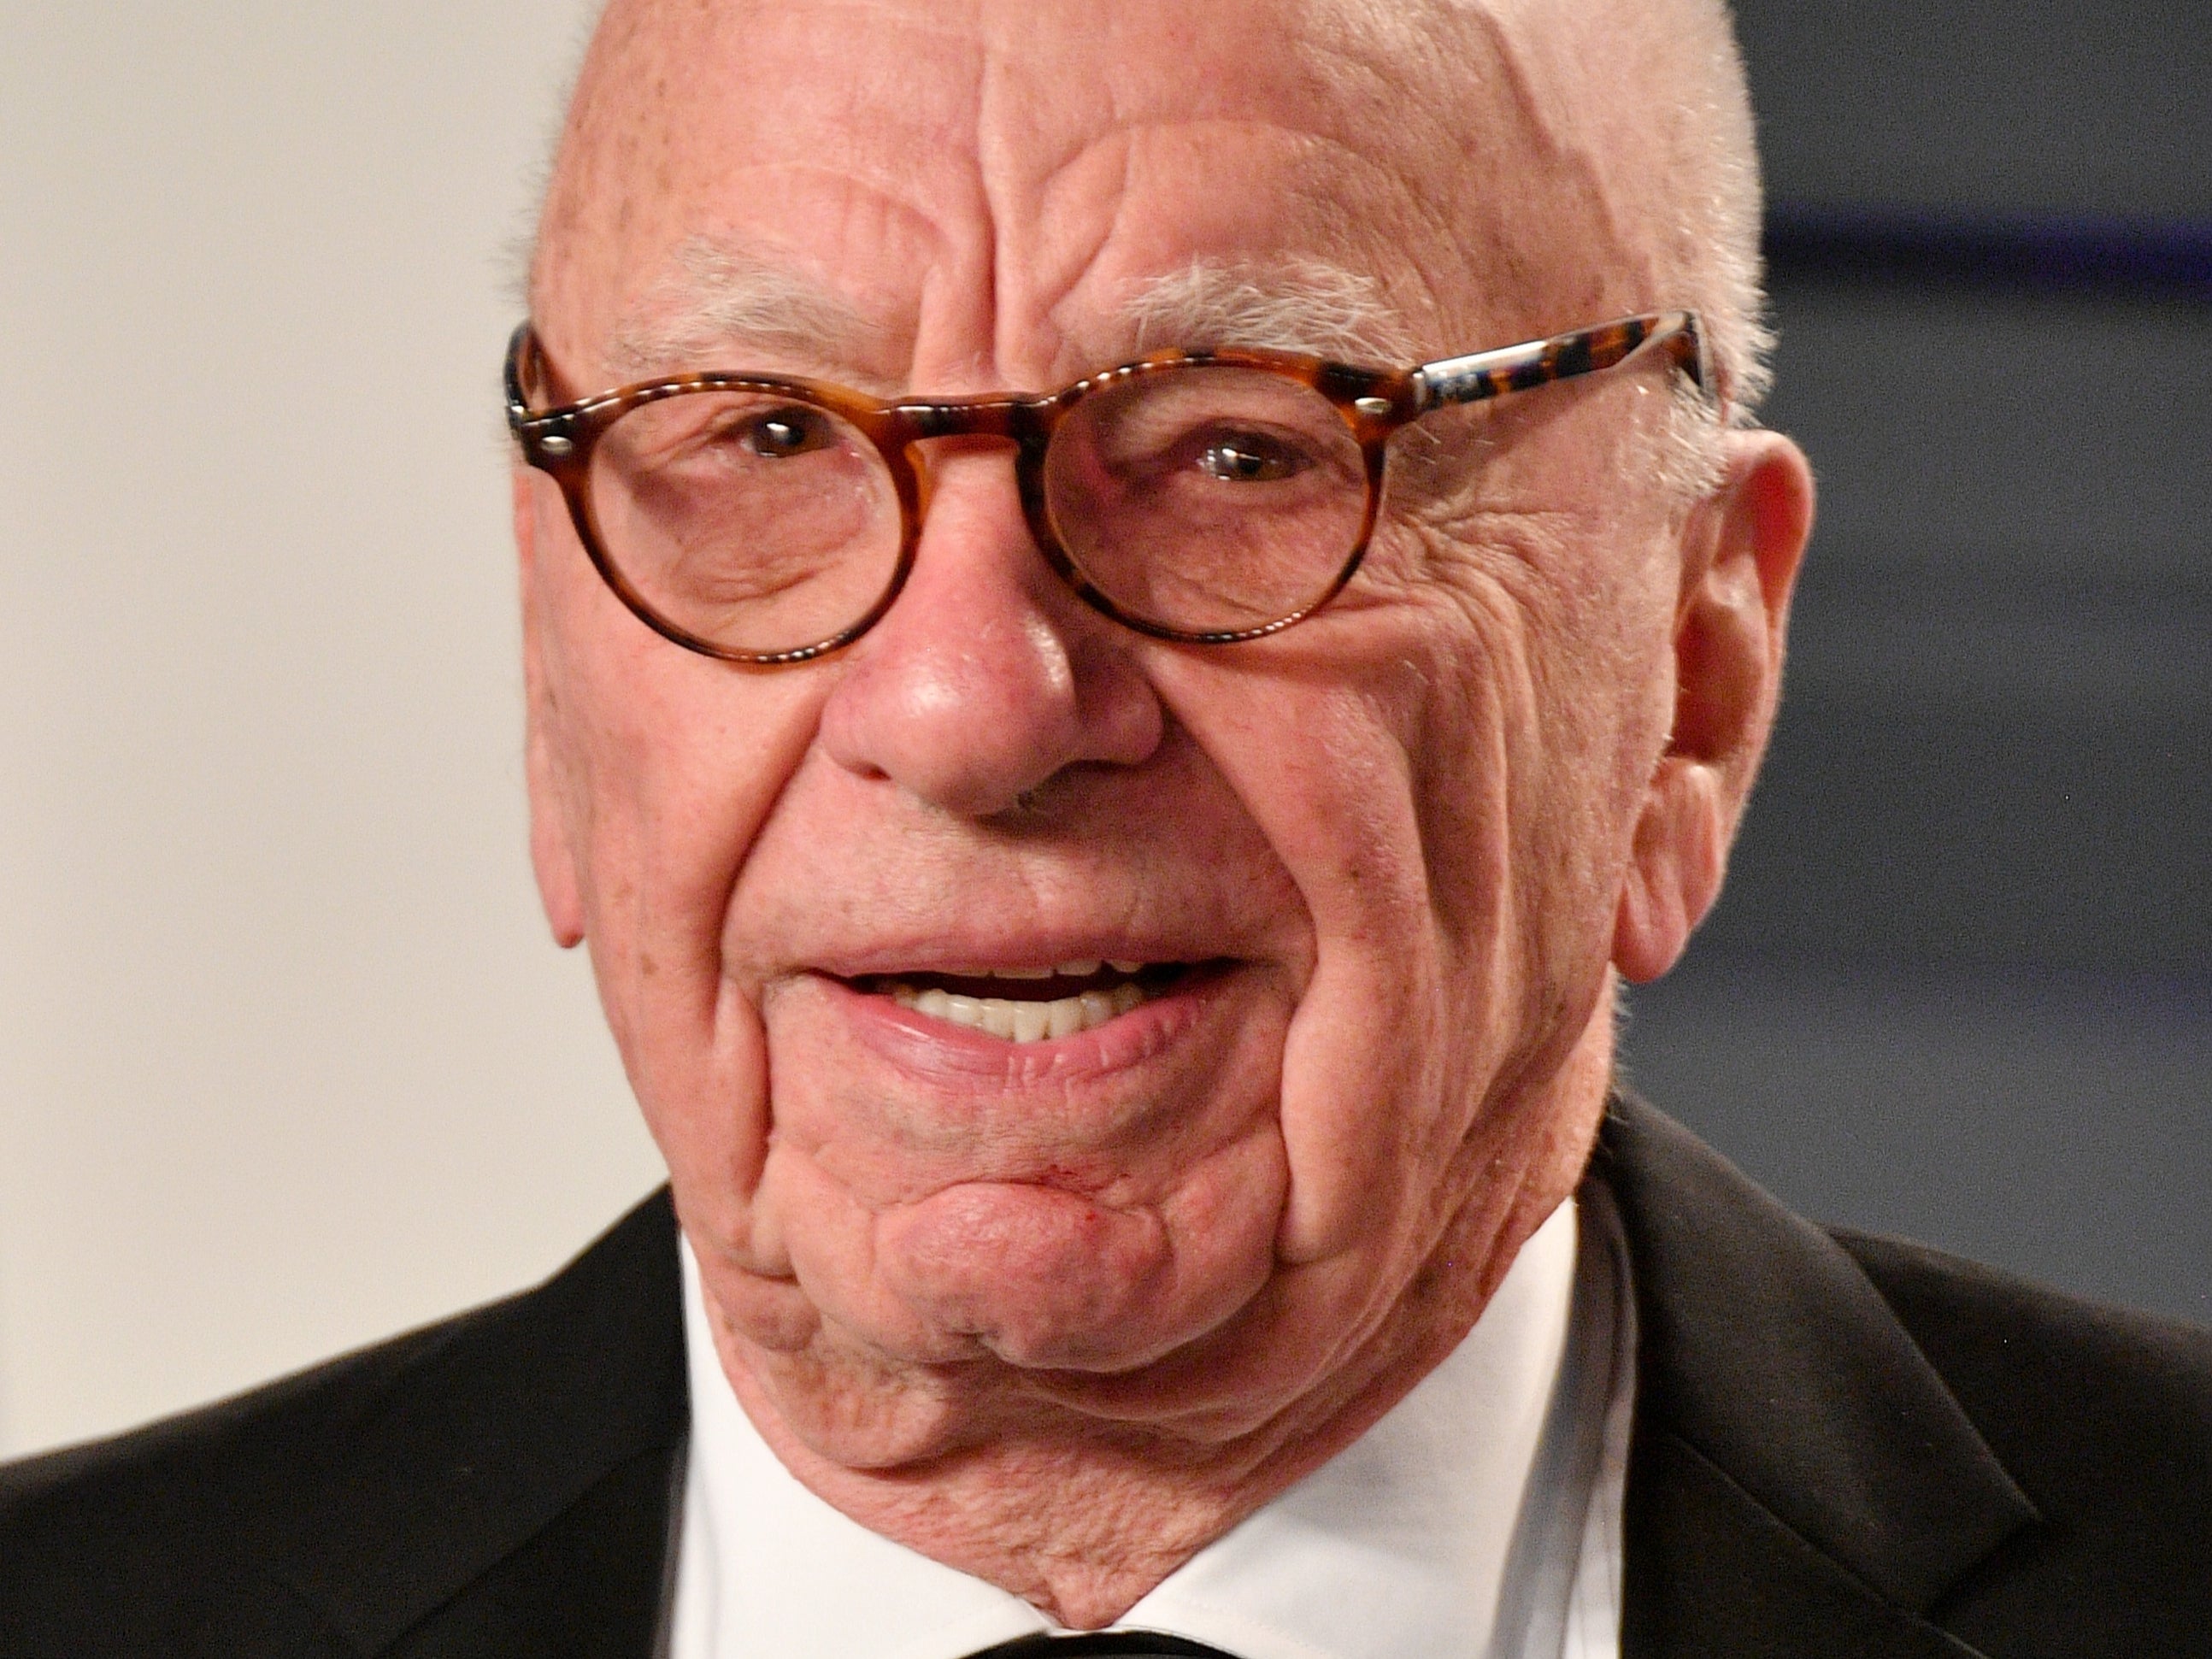 Rupert Murdoch has been engaged six times and married five times